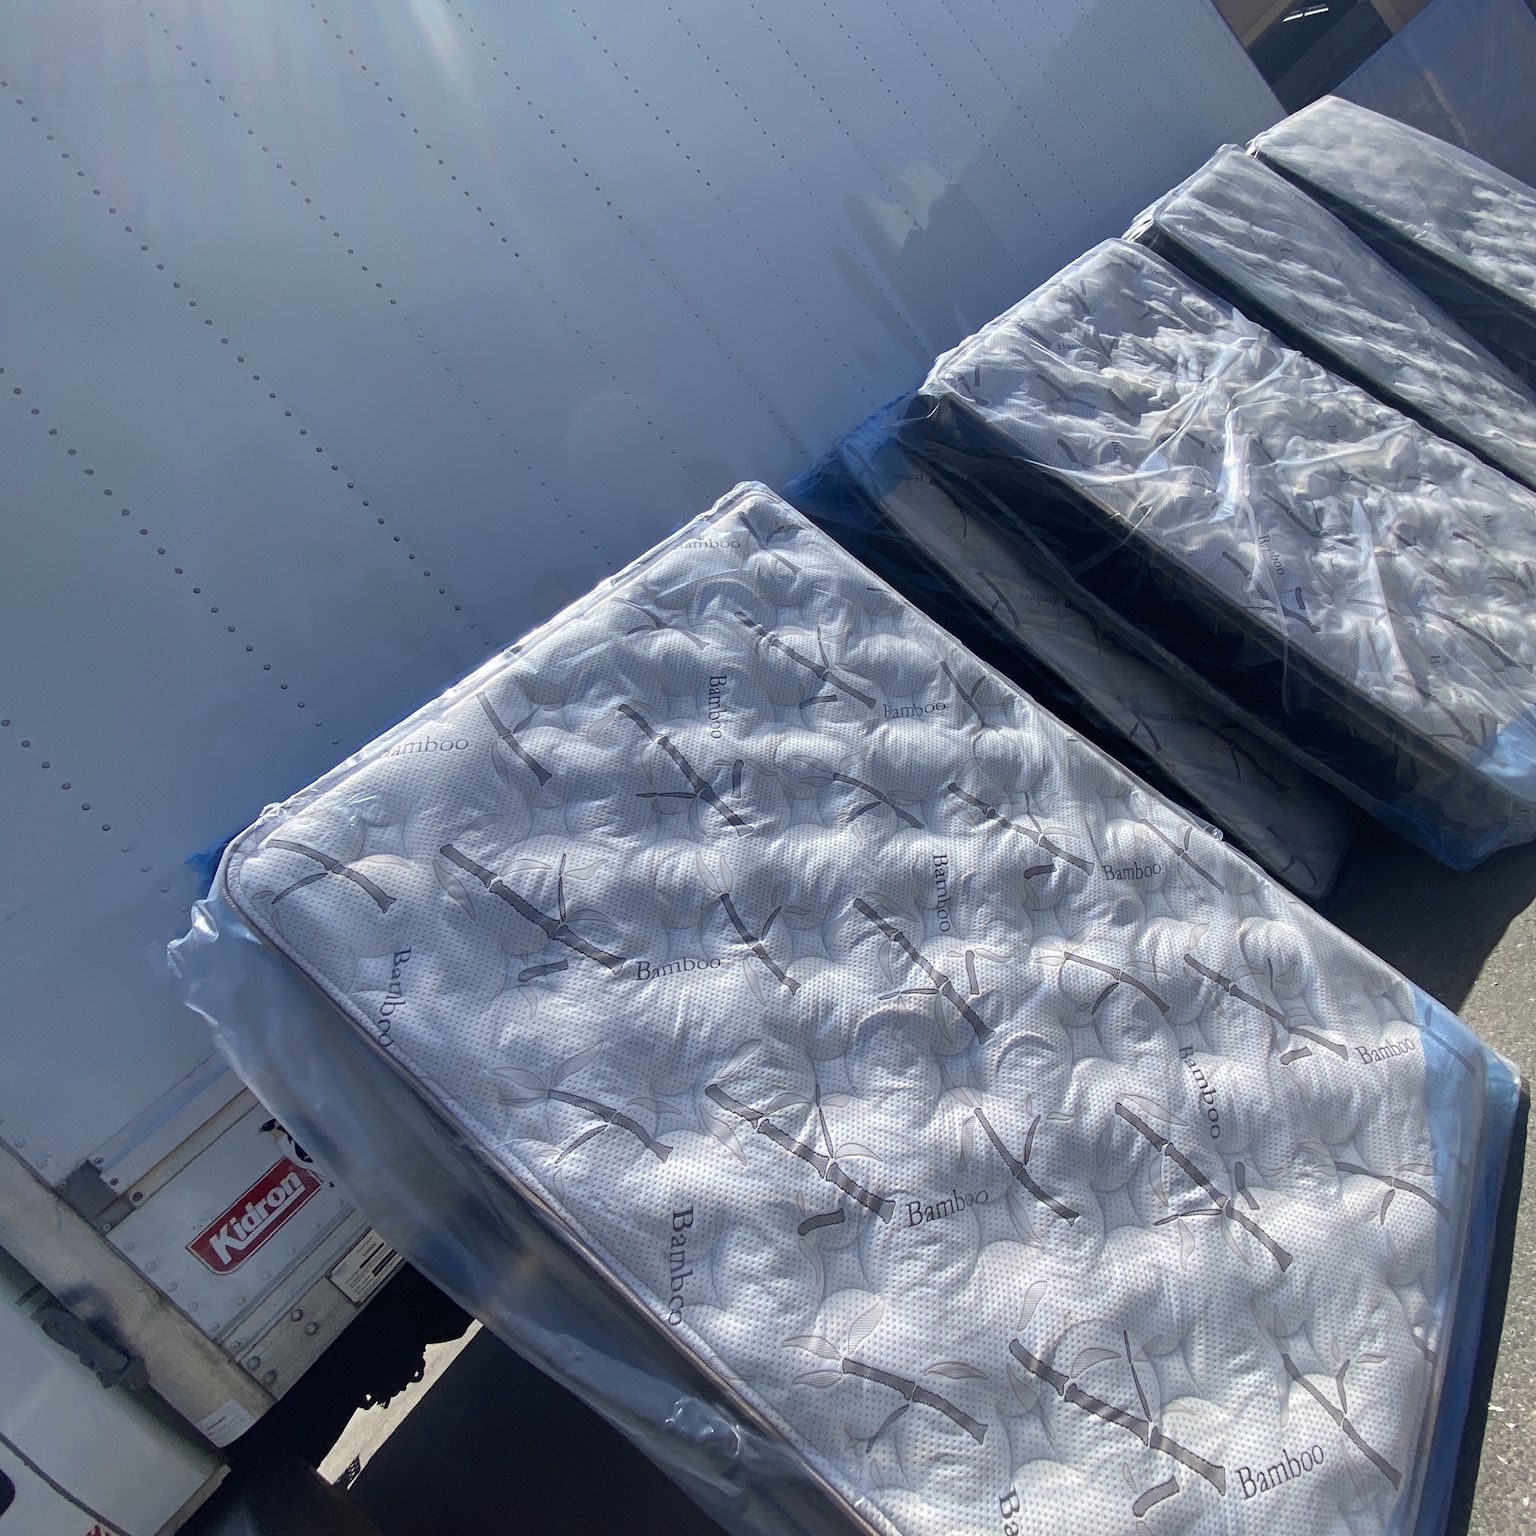 NEW!! Comfy Bargain Beds Twin Full Queen King Cal King Mattress STILL IN PLASTIC!! 🚛 Avail